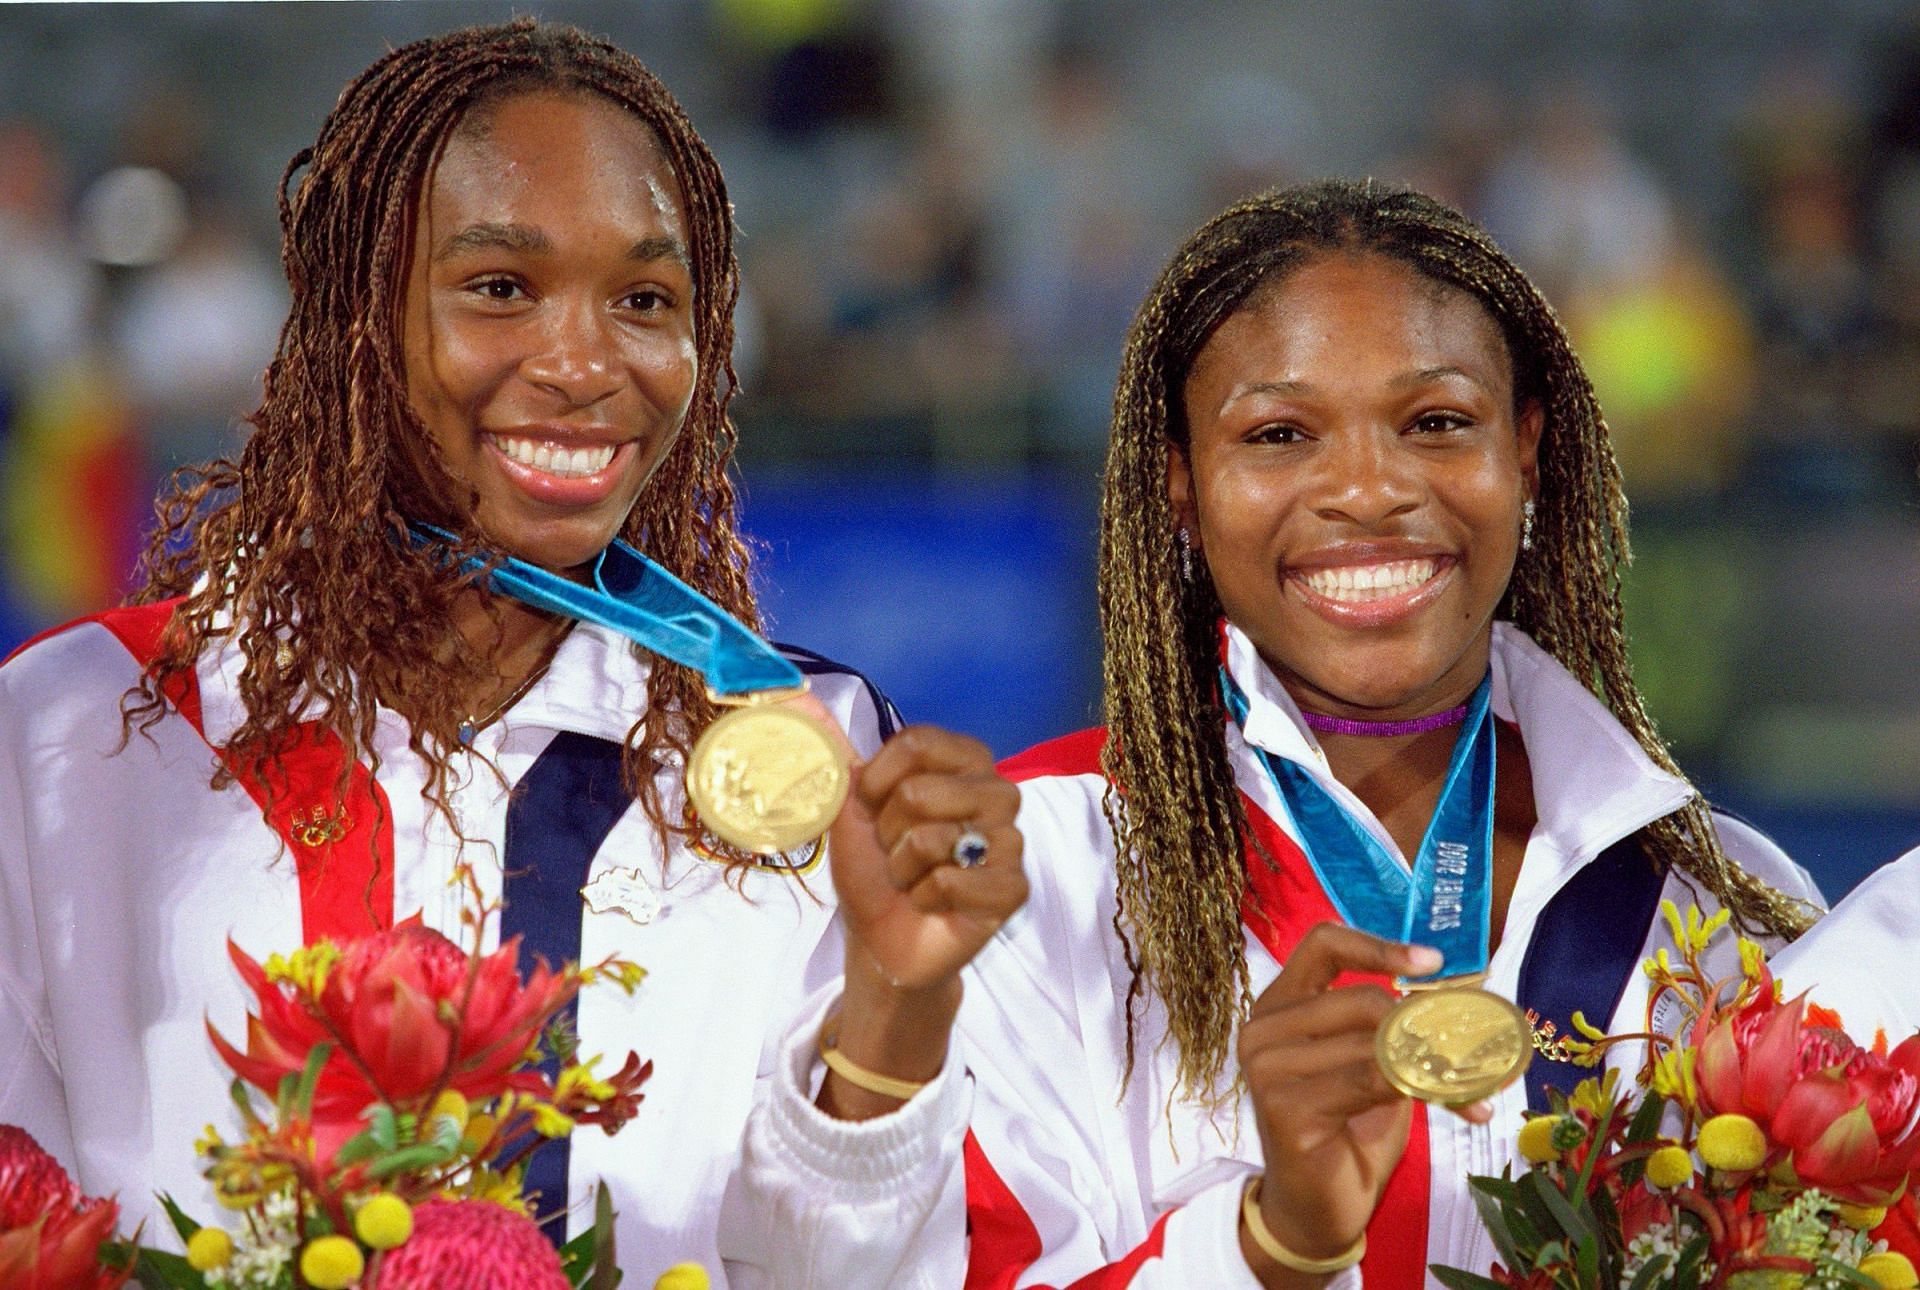 Venus (L) and Serena Williams pictured at the 2000 Sydney Olympics